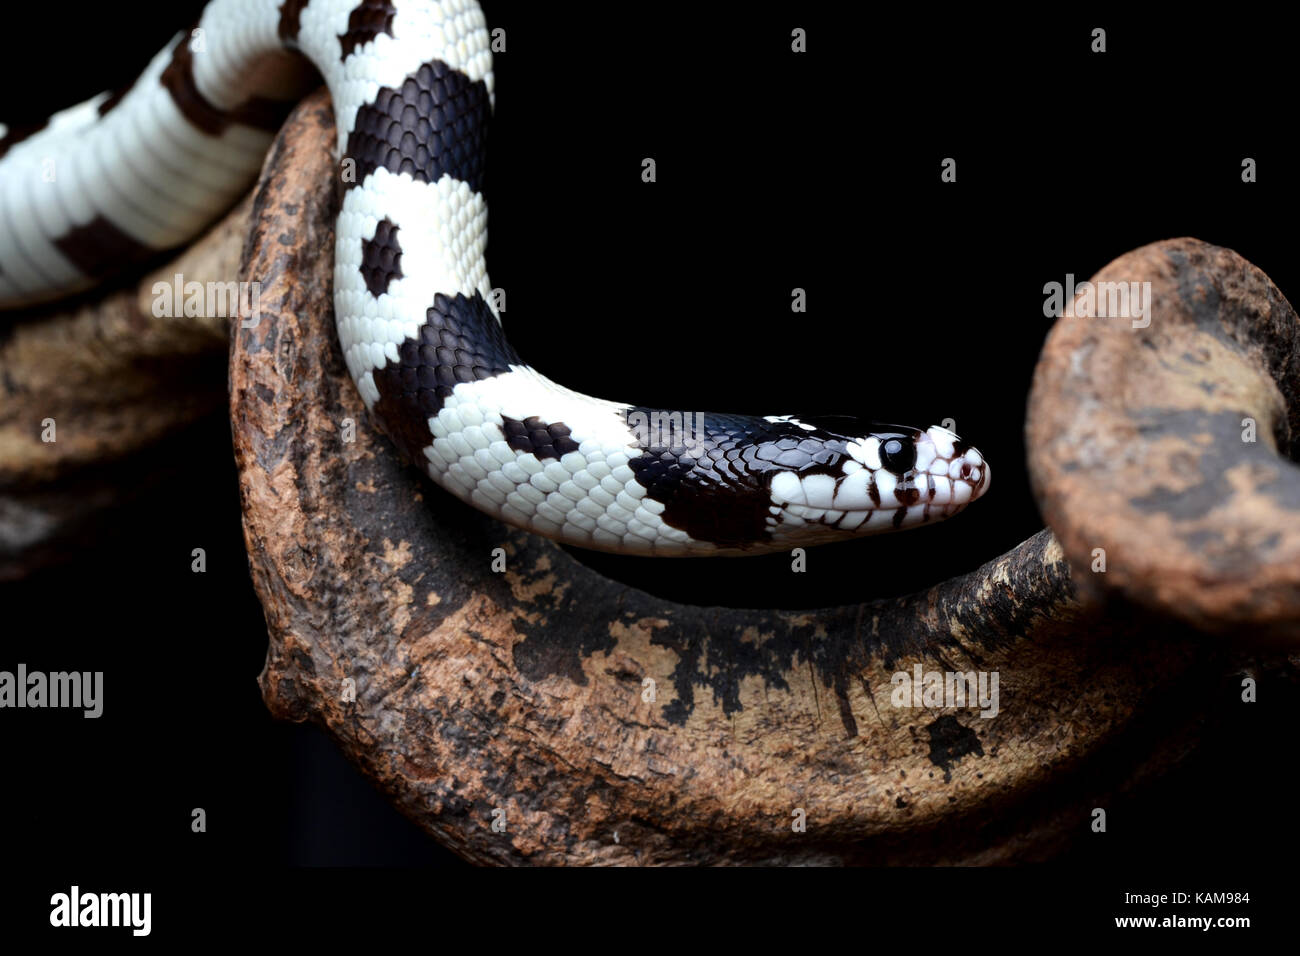 Californian Kingsnake (Lampropeltis getula californiae) on a branch in a studio with a black background. Stock Photo